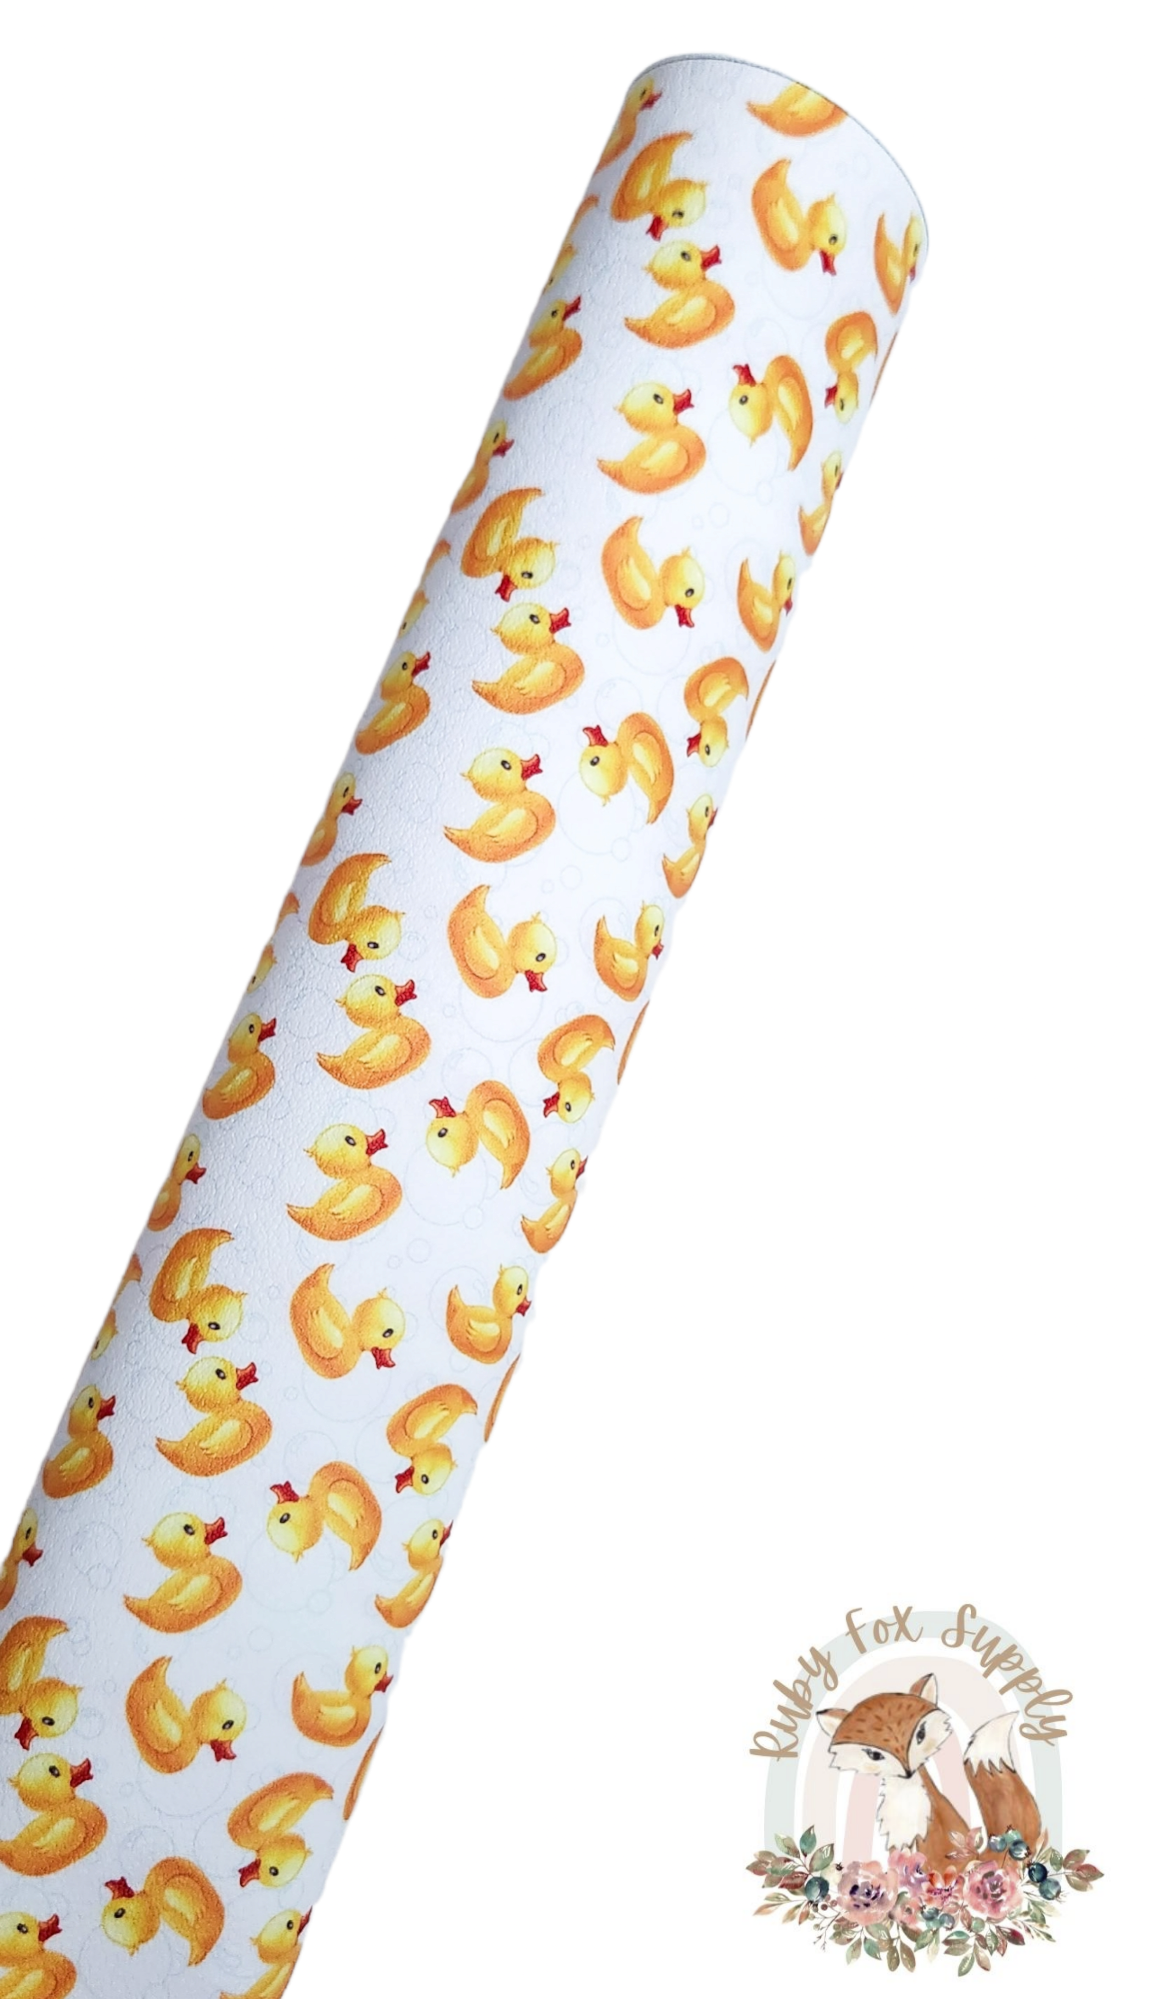 Rubber Ducky 9x12 faux leather sheet